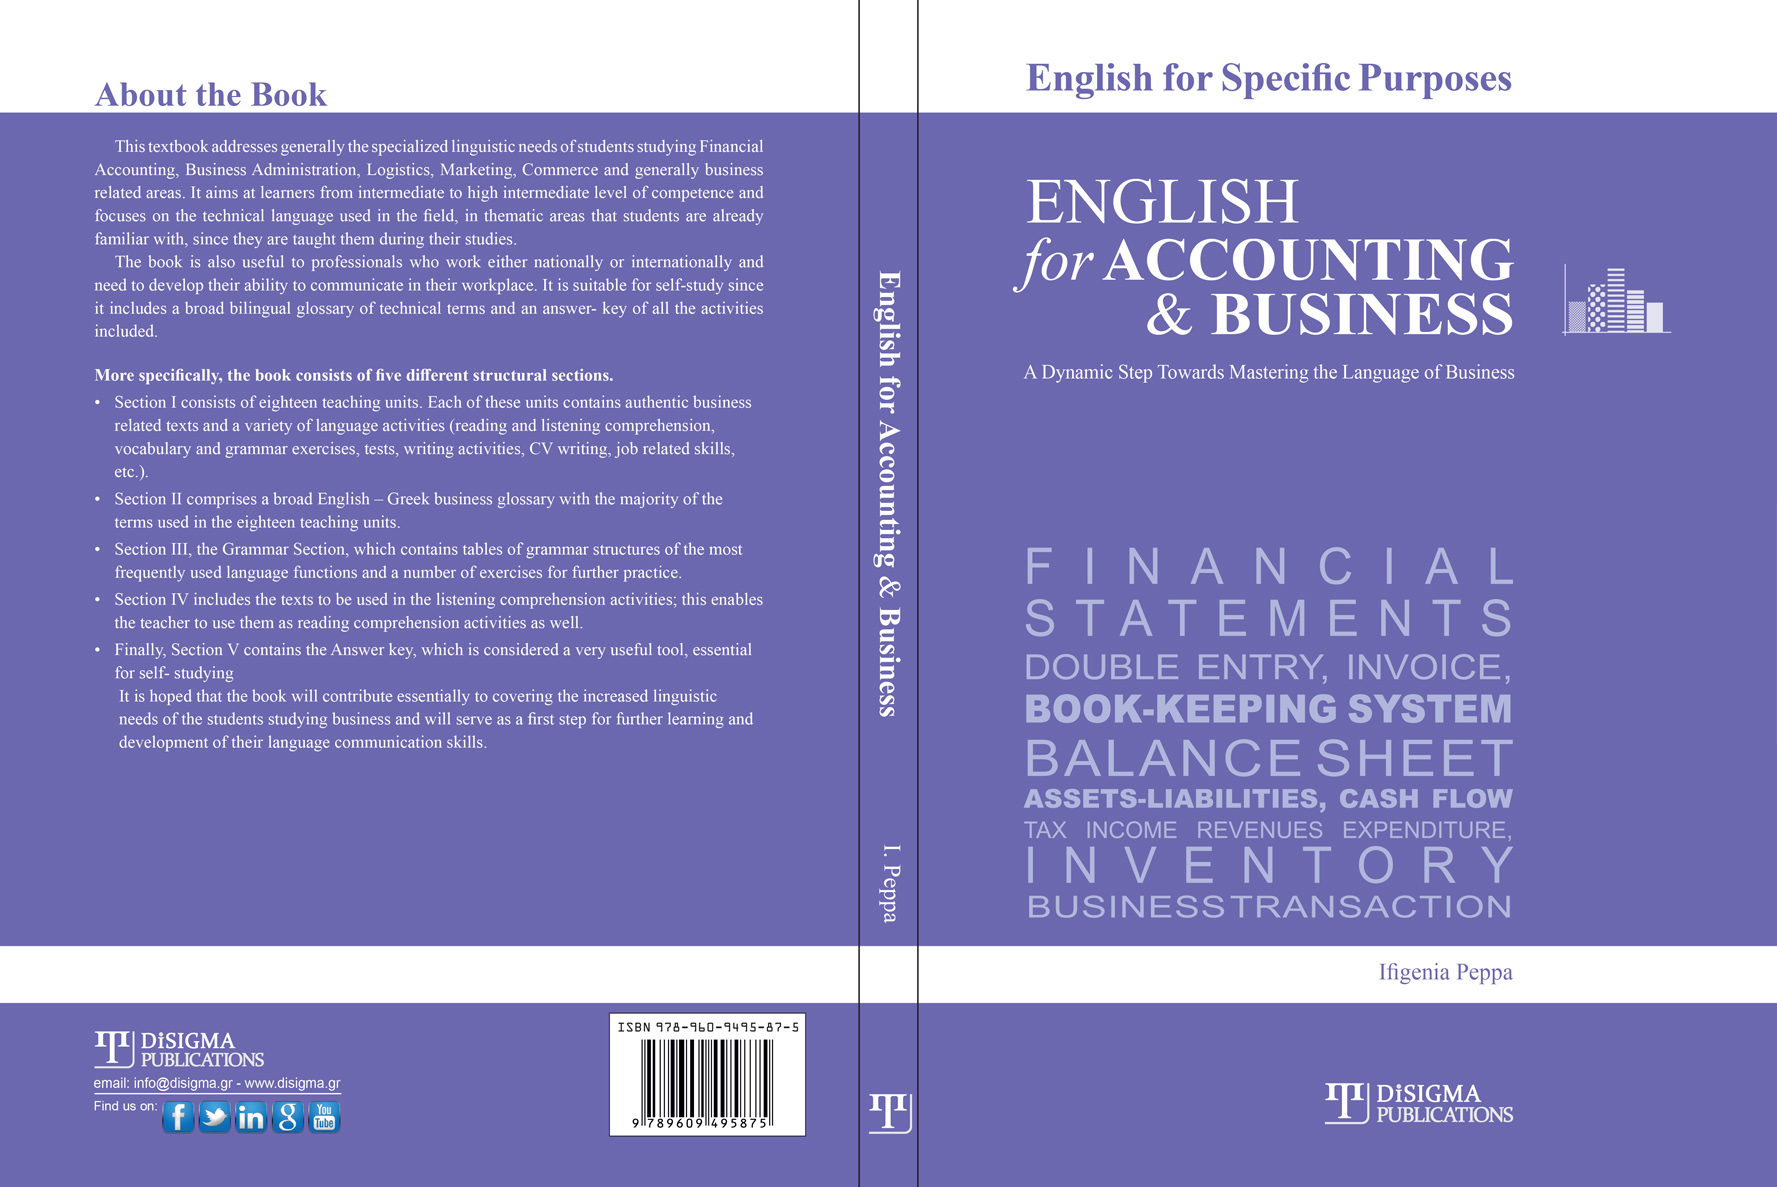 ENGLISH FOR ACCOUNTIN AND BUSSINES